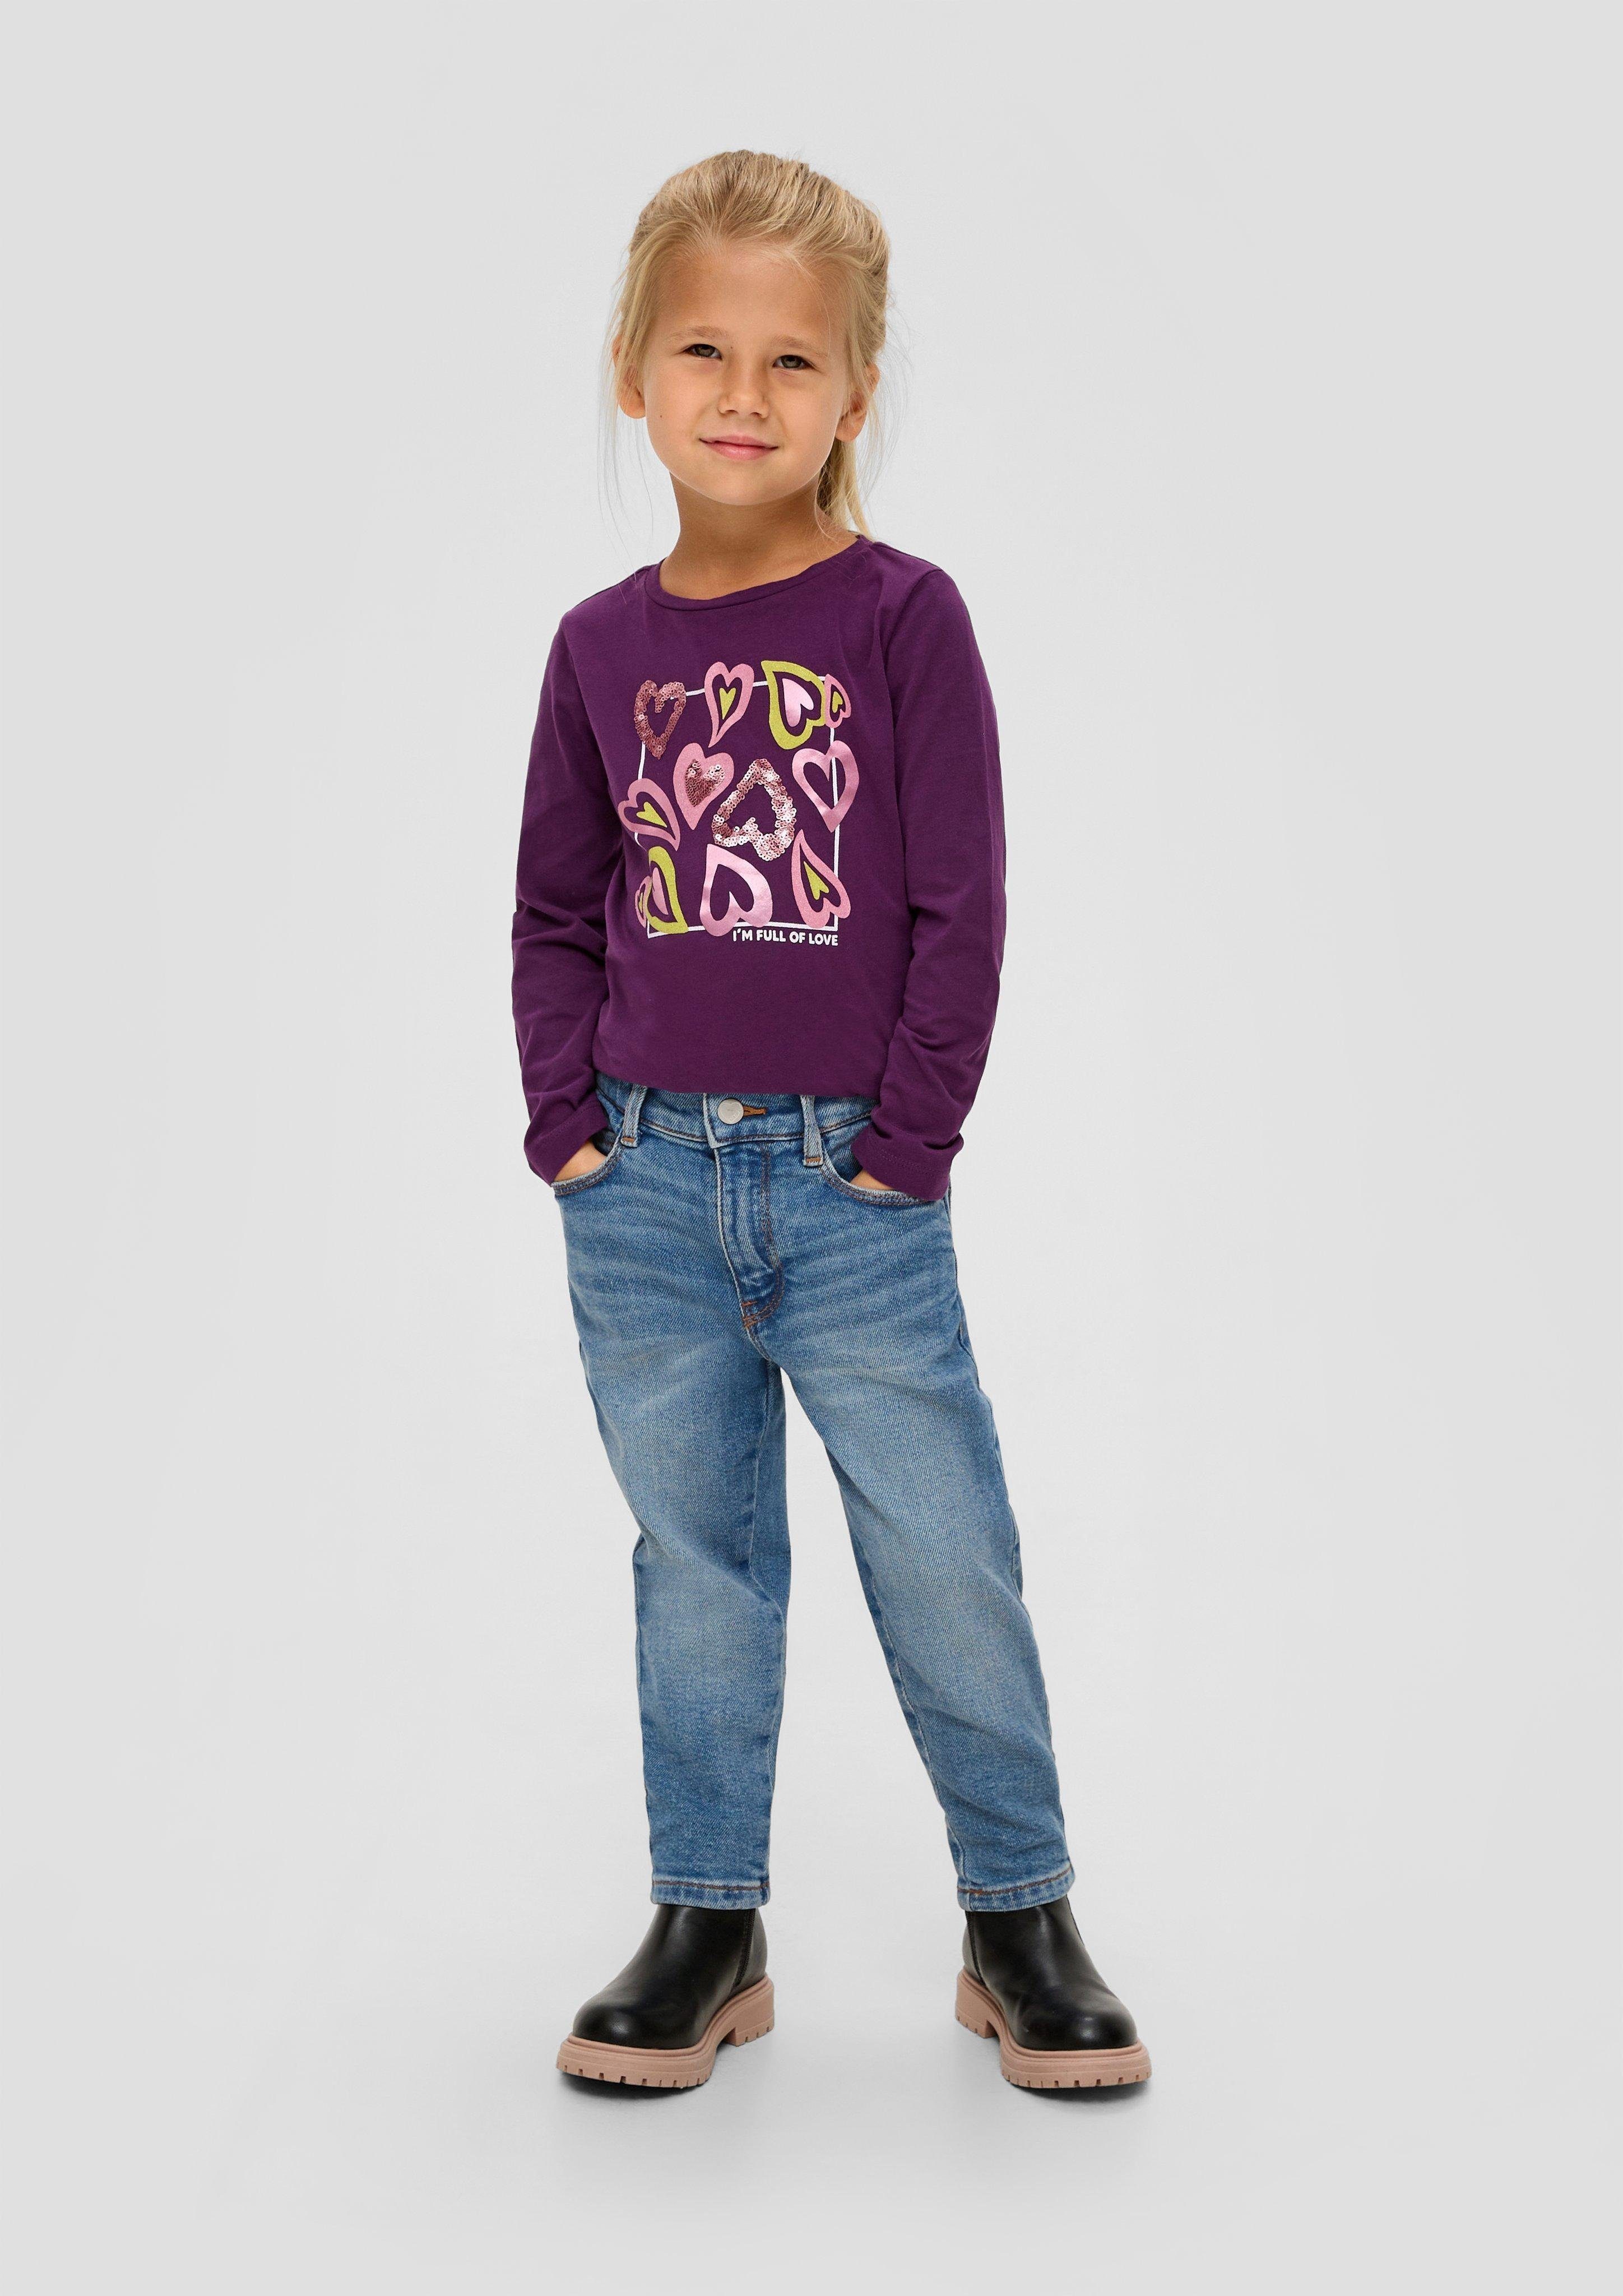 Stoffhose / Kontrastnähte Ankle-Jeans Tapered / Fit s.Oliver Waschung, Leg High Mom Rise / Relaxed